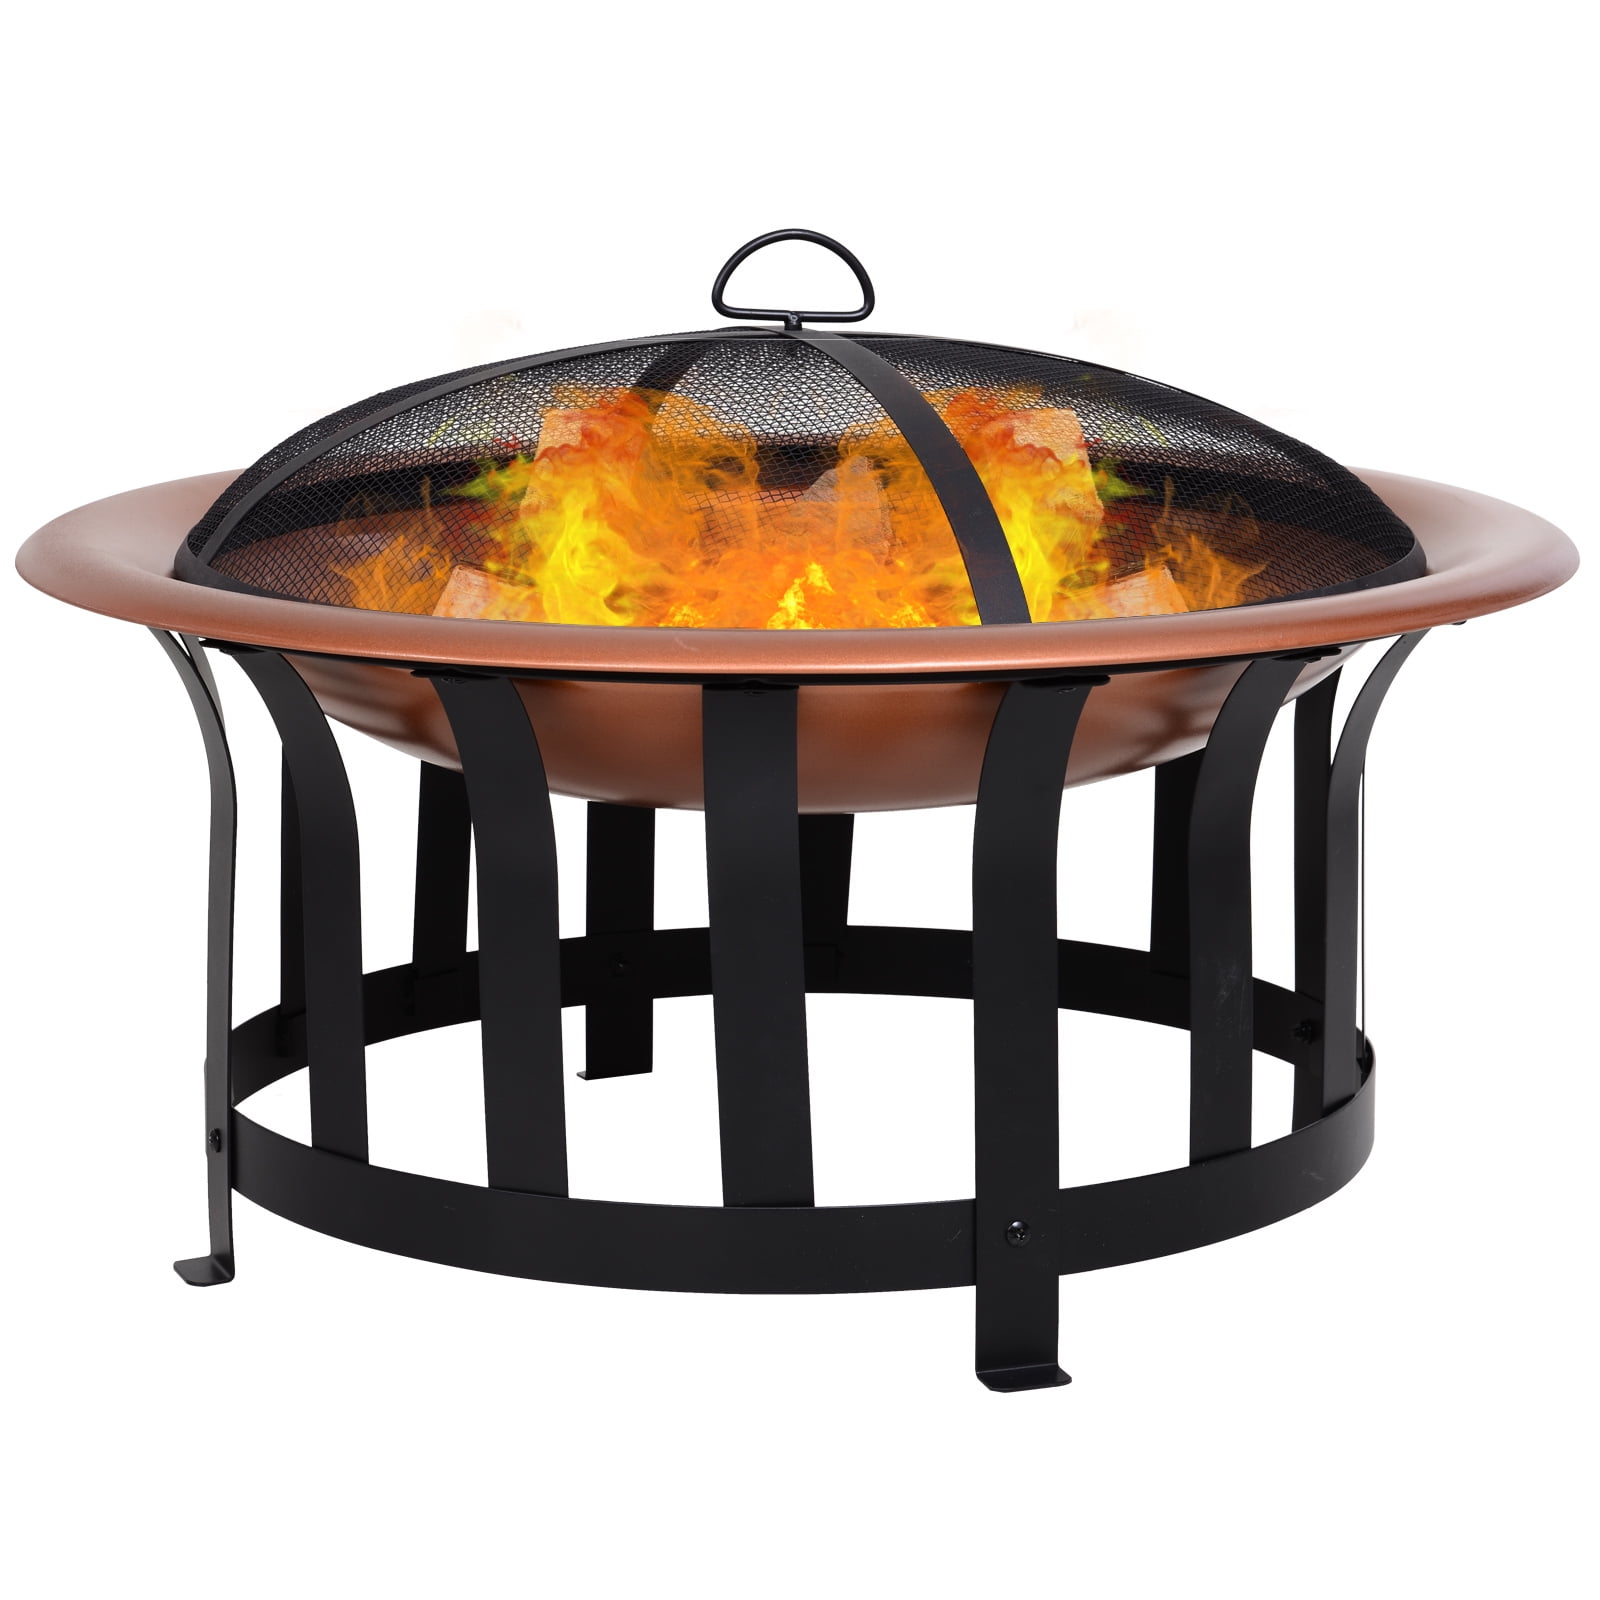 Outsunny Copper Colored Round Metal, Red Ember Gas Crossweave Fire Pit Bowl